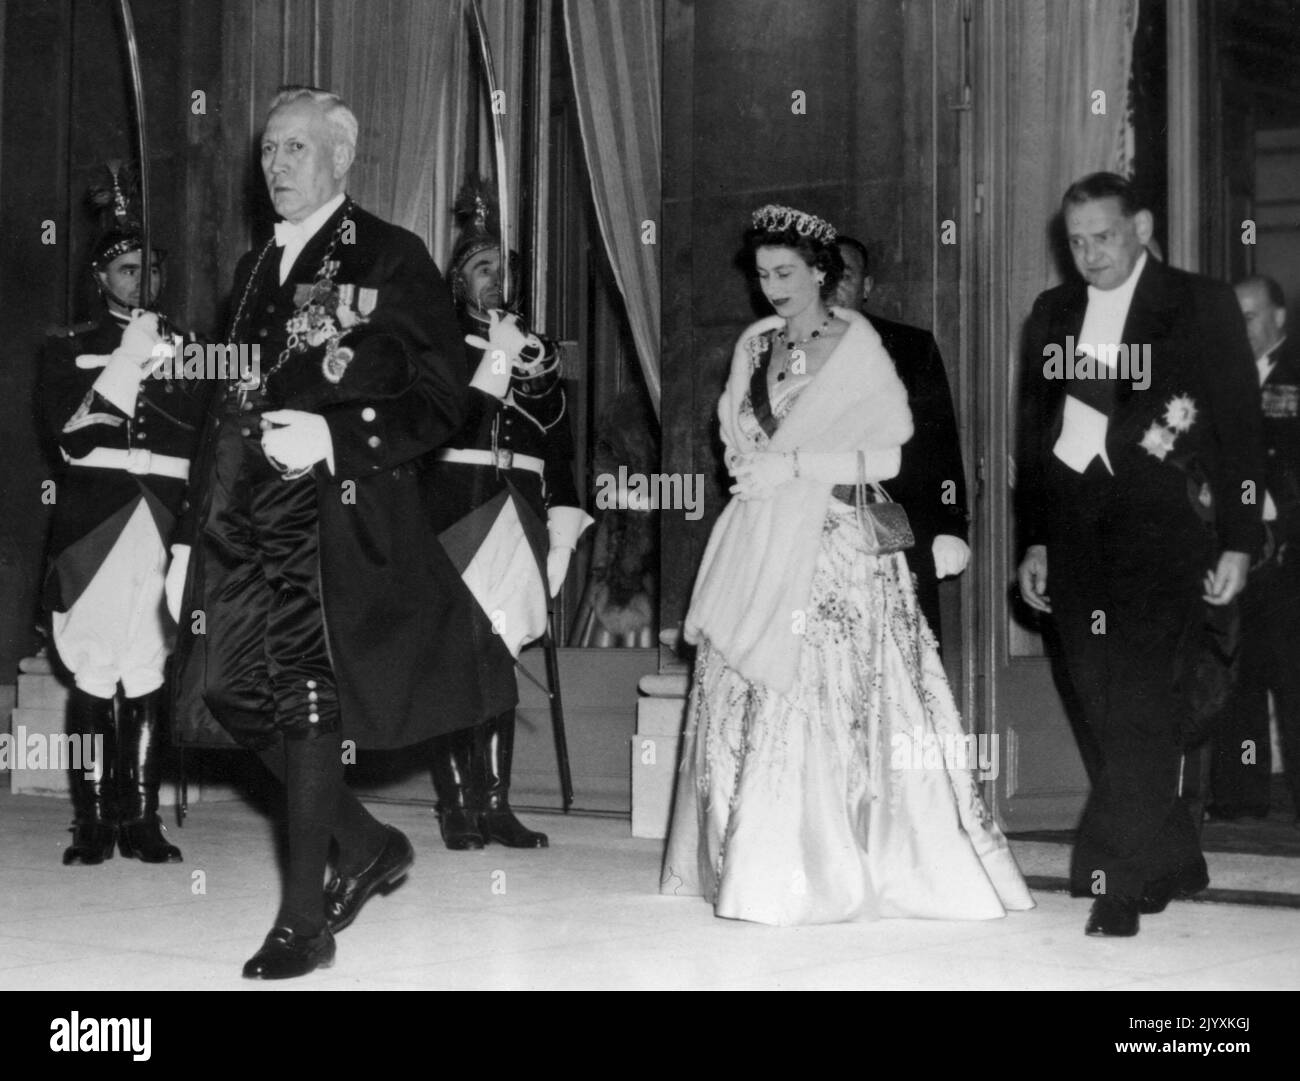 File photo dated 9/4/1957 of Queen Elizabeth II wearing a Norman Hartnell gown as she is escorted by her host, French President Rene Coty (right) as she leaves the Elysee Palace, Paris, to attend the gala performance at the Opera. Elizabeth II was famed for her love of block colours and matching hats and her fashion became a legendary part of her role as monarch. The Queen was once described as 'power dressing in extremis' for using vibrant shades to make herself stand out from the crowd while her hats allowed her to be easily spotted but were small enough so her face was visible. Issue date:  Stock Photo